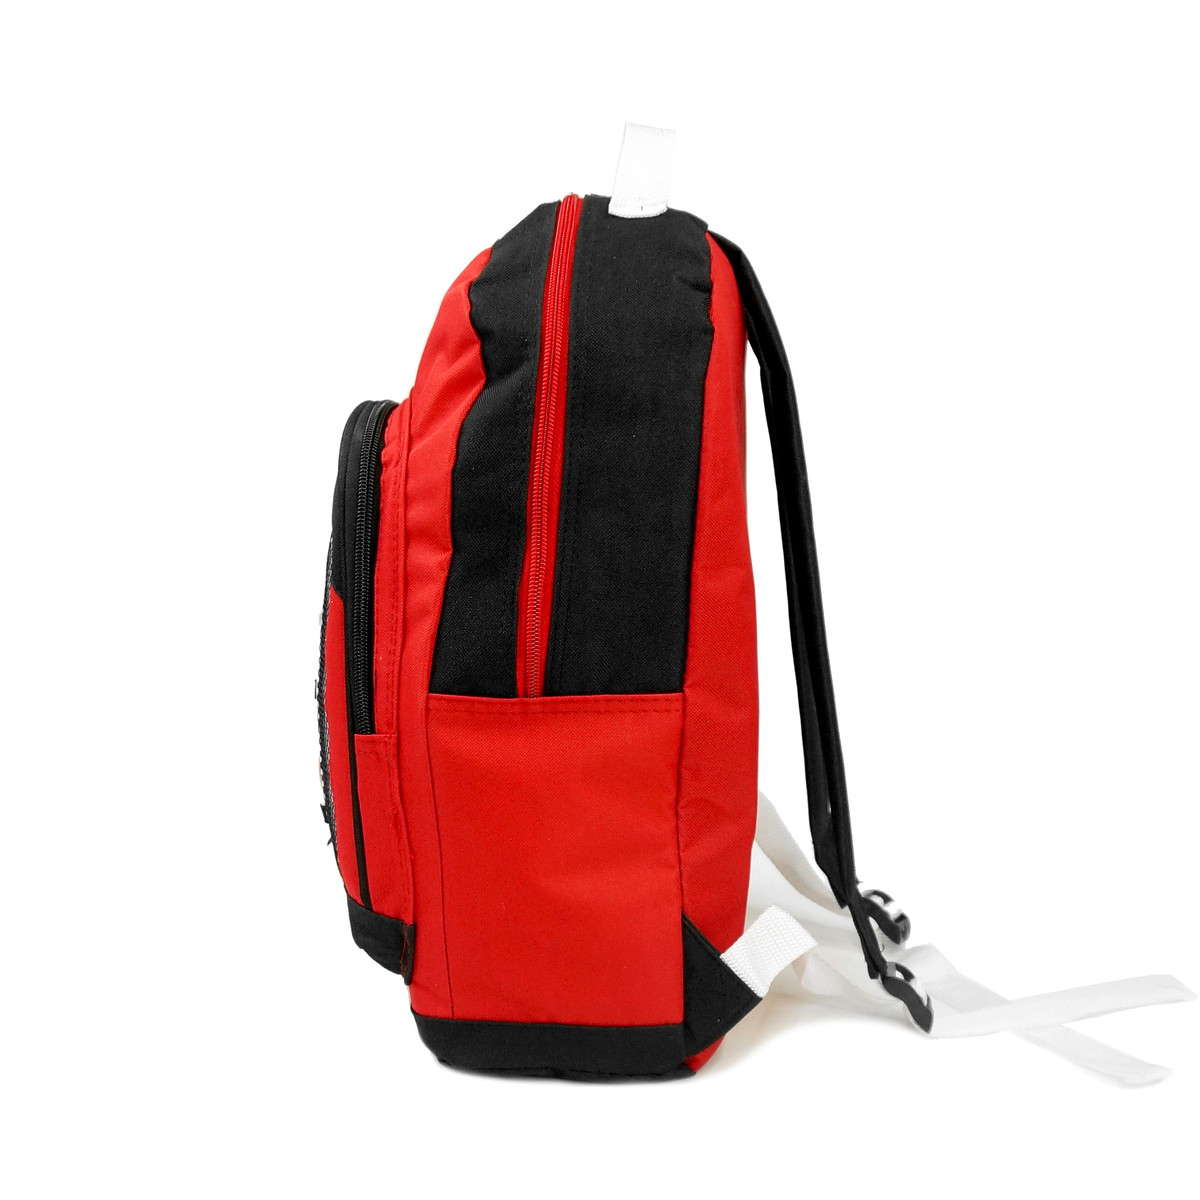 K-Cliffs 15" Lightweight Backpack, Daypack Bungee Water Resistant for Travel School and College, Unisex Color for Casual Everyday Kids & Teens (Red) - image 3 of 7